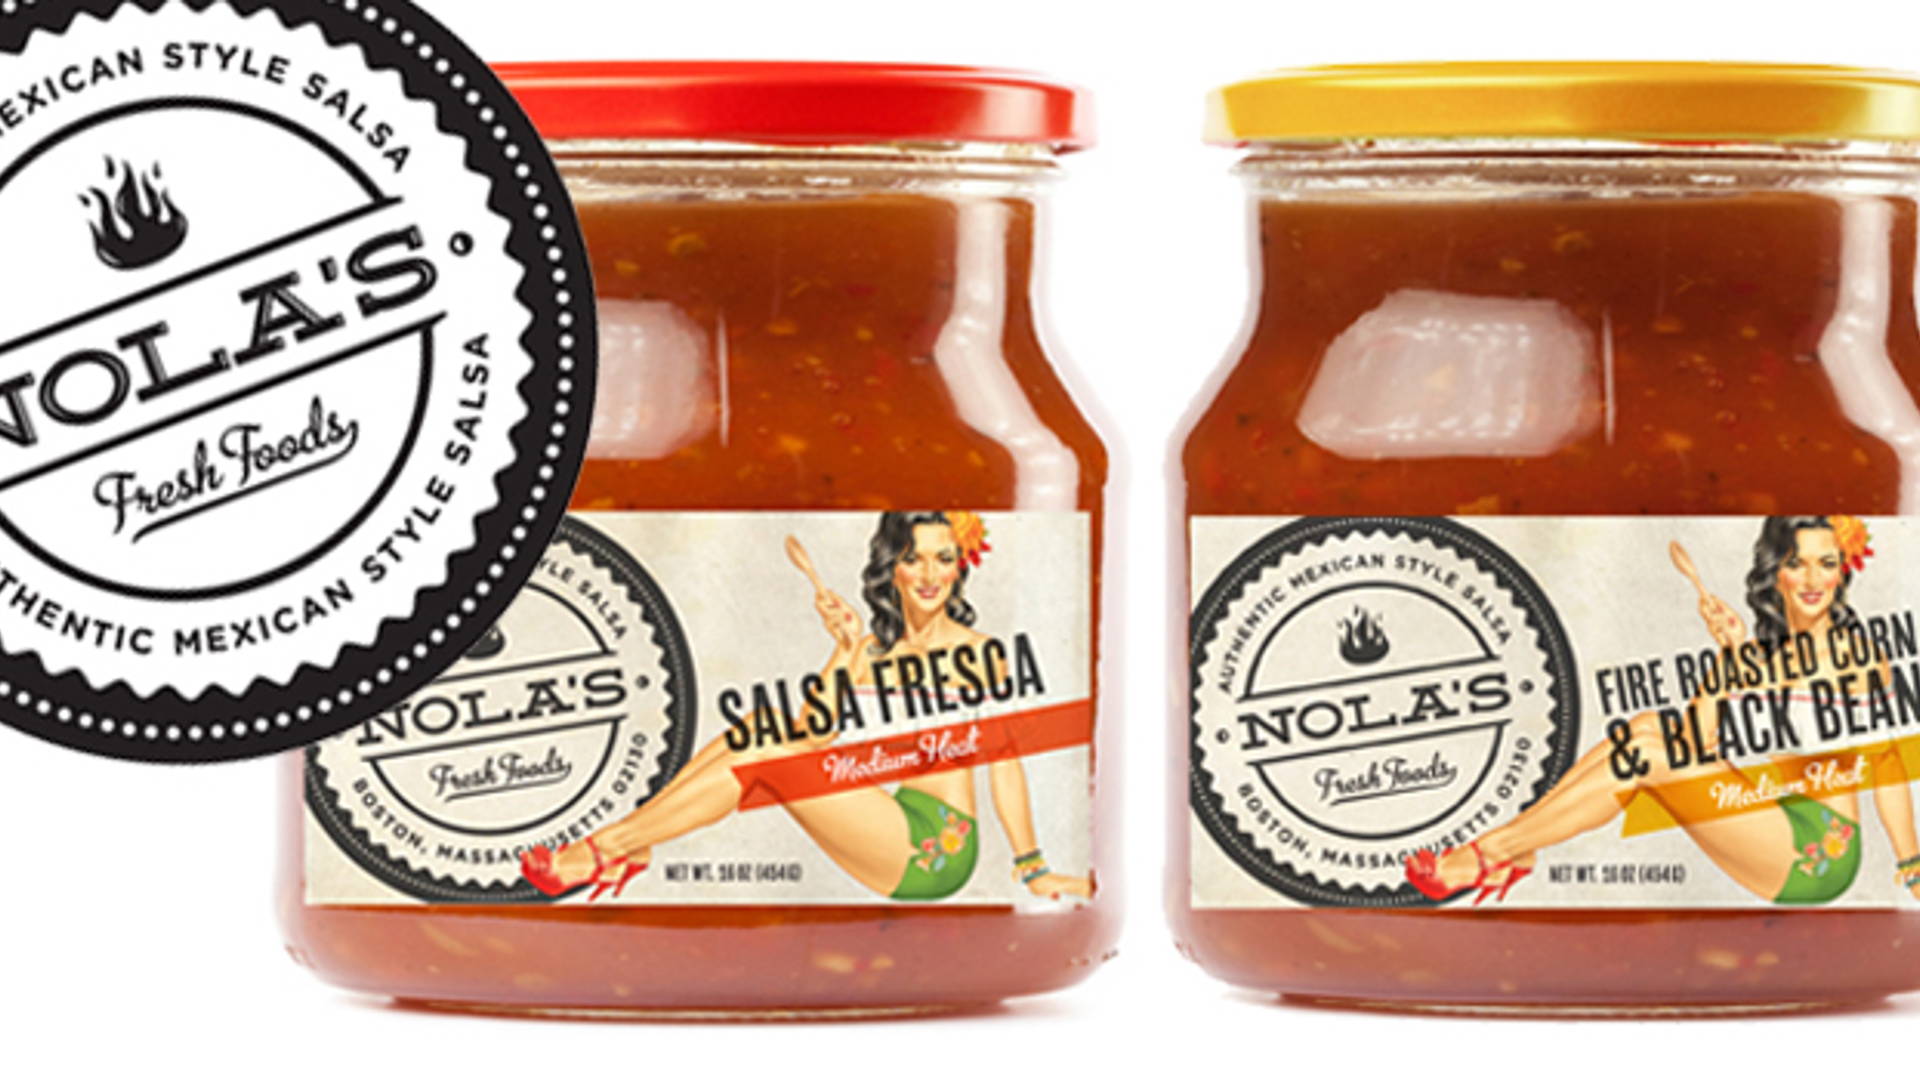 Featured image for Nola's Mexican Style Salsa